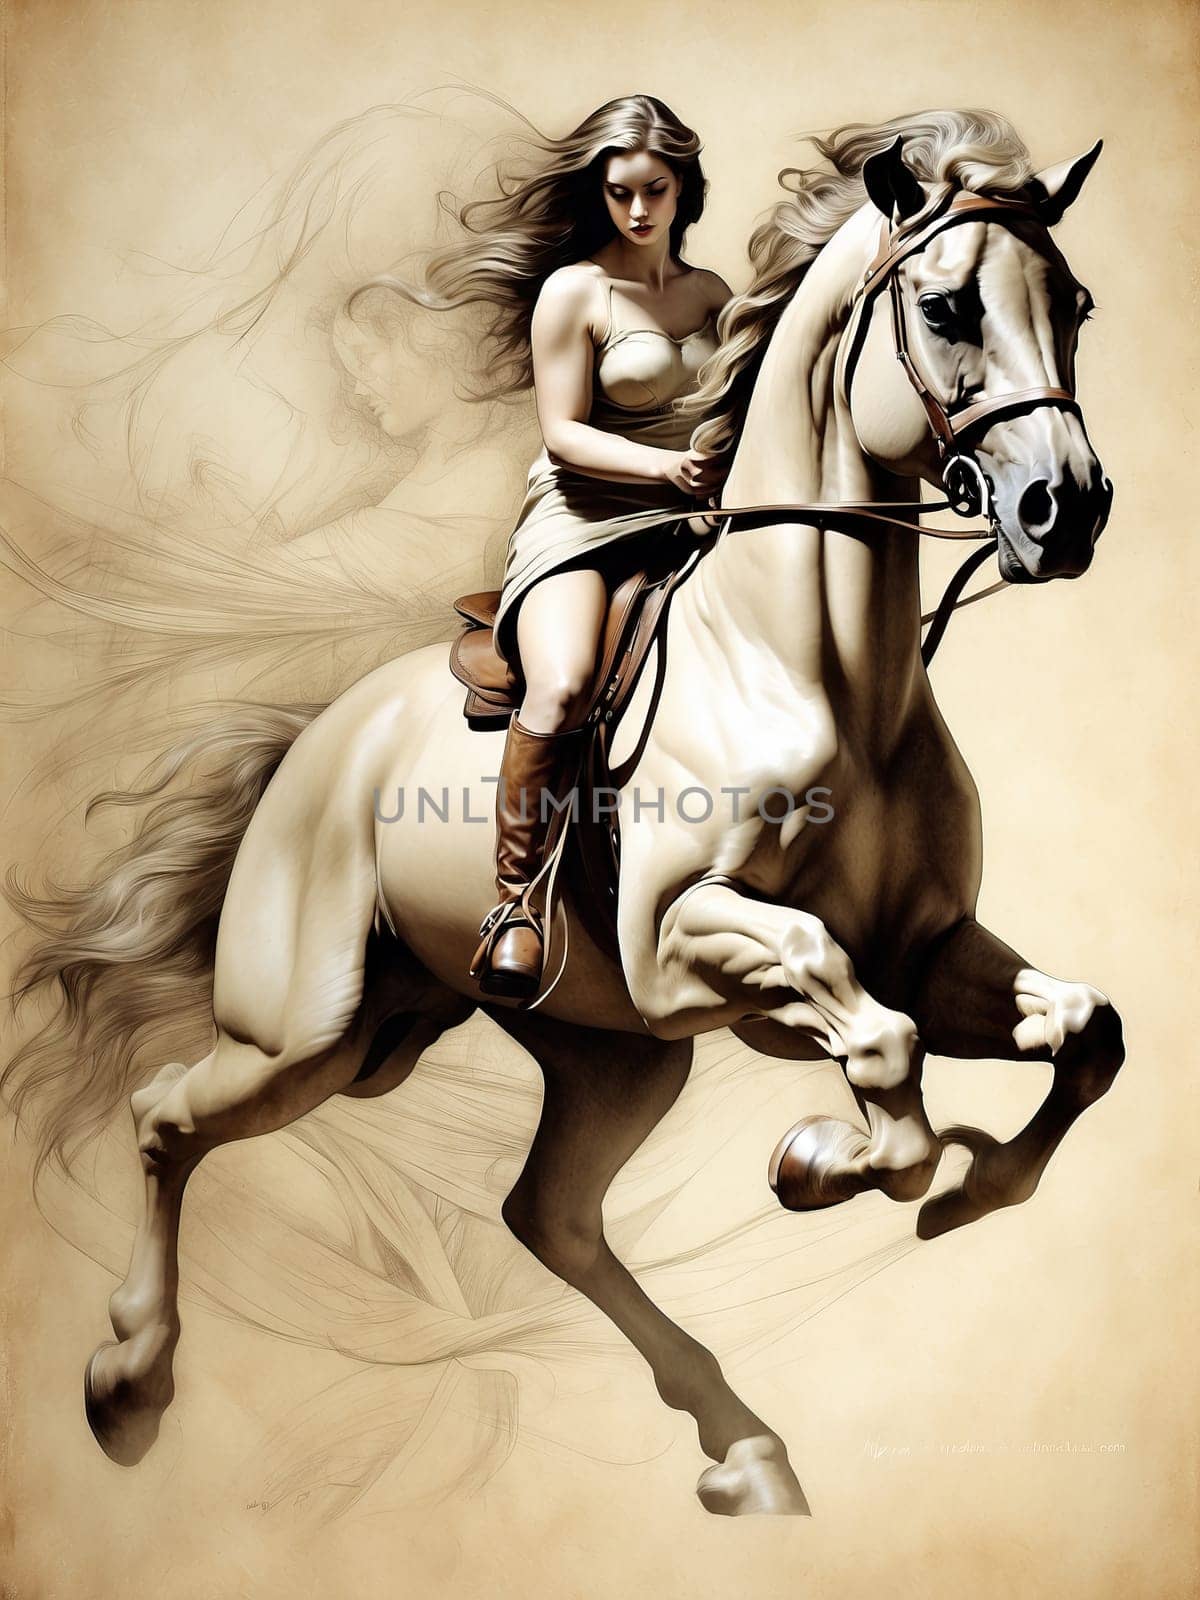 Drawn girl on a horse by applesstock